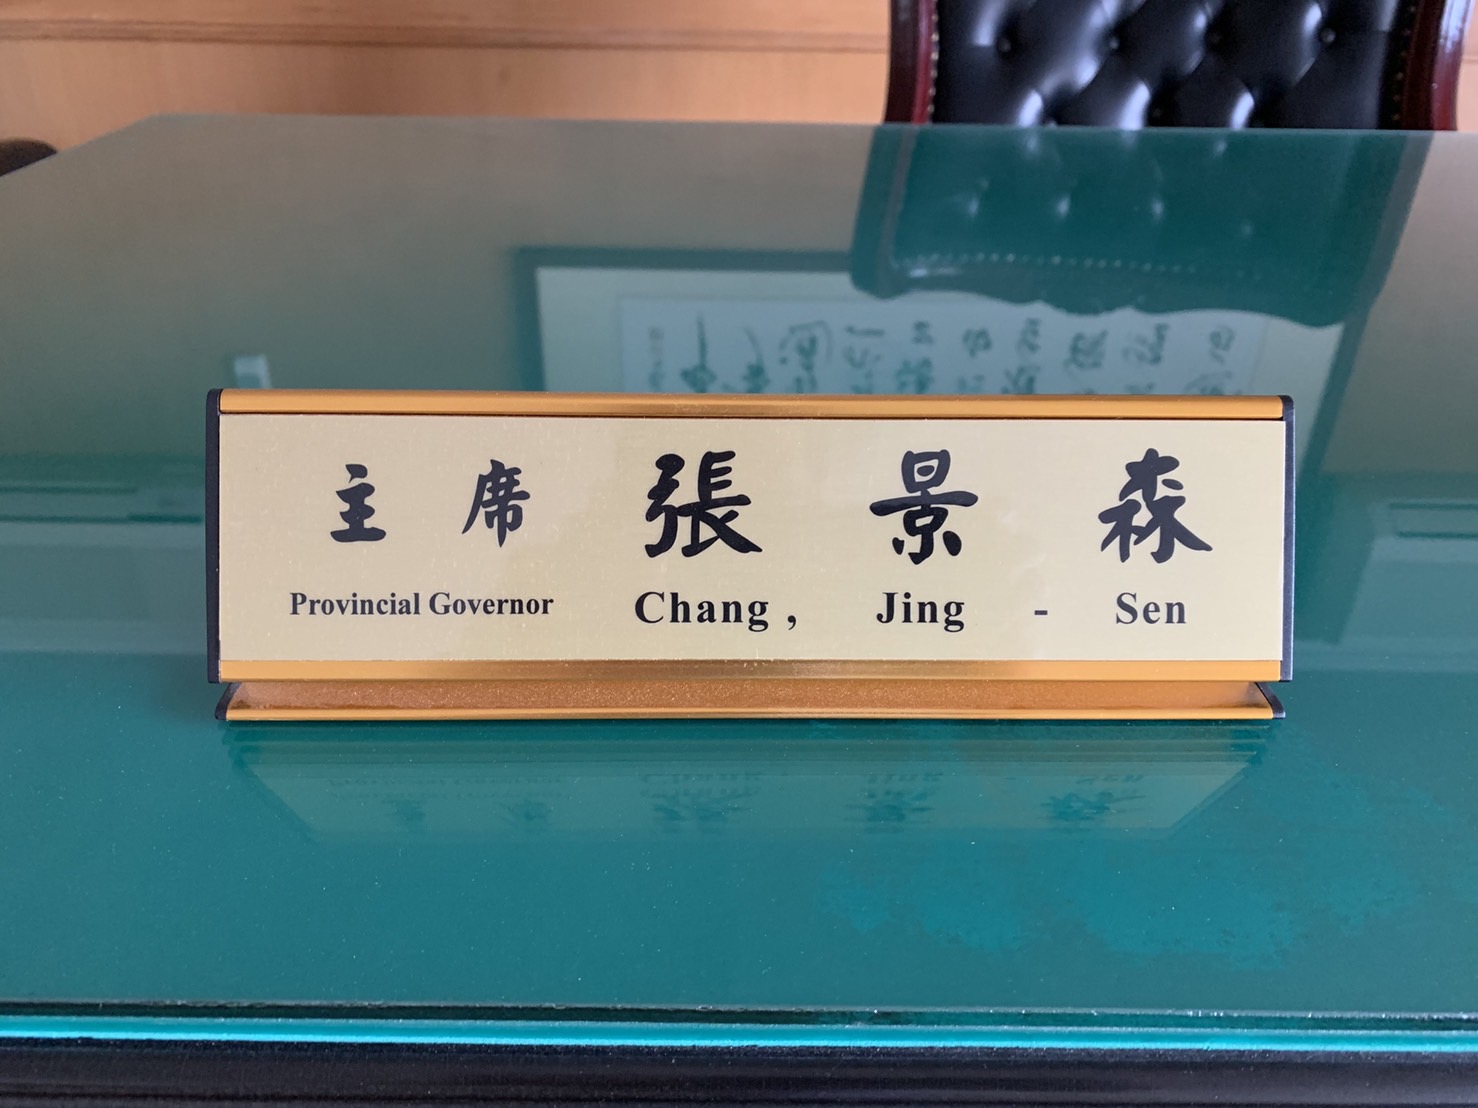 Desk name placard of the Governor of the Fujian Provincial Government